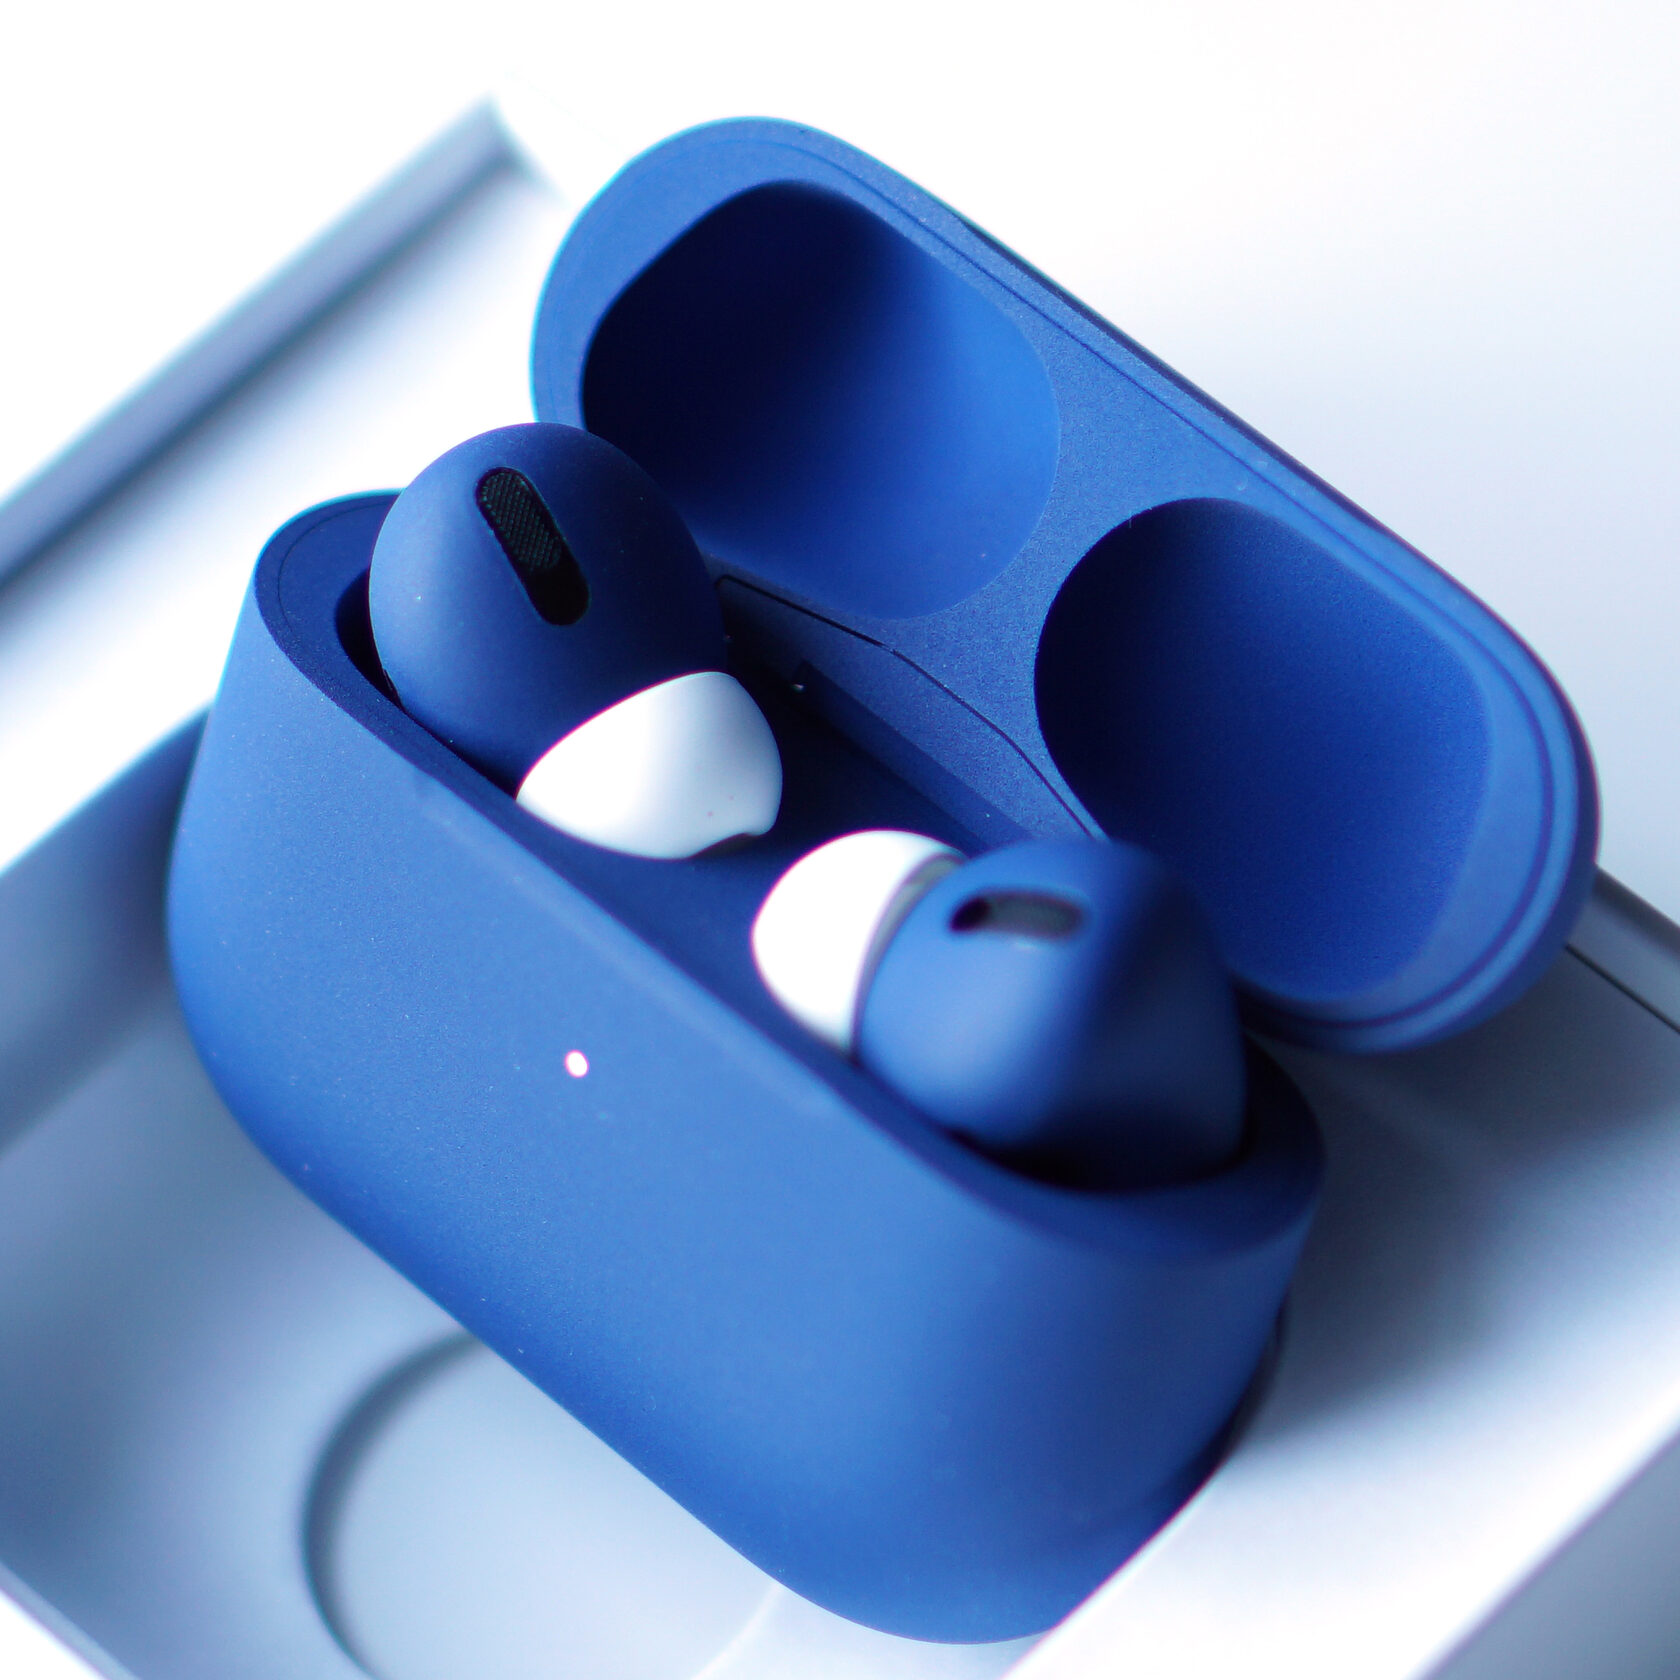 Airpods pro дата. AIRPODS Pro 2. Аирподс 3. AIRPODS Pro 2 Blue. AIRPODS Pro 3.